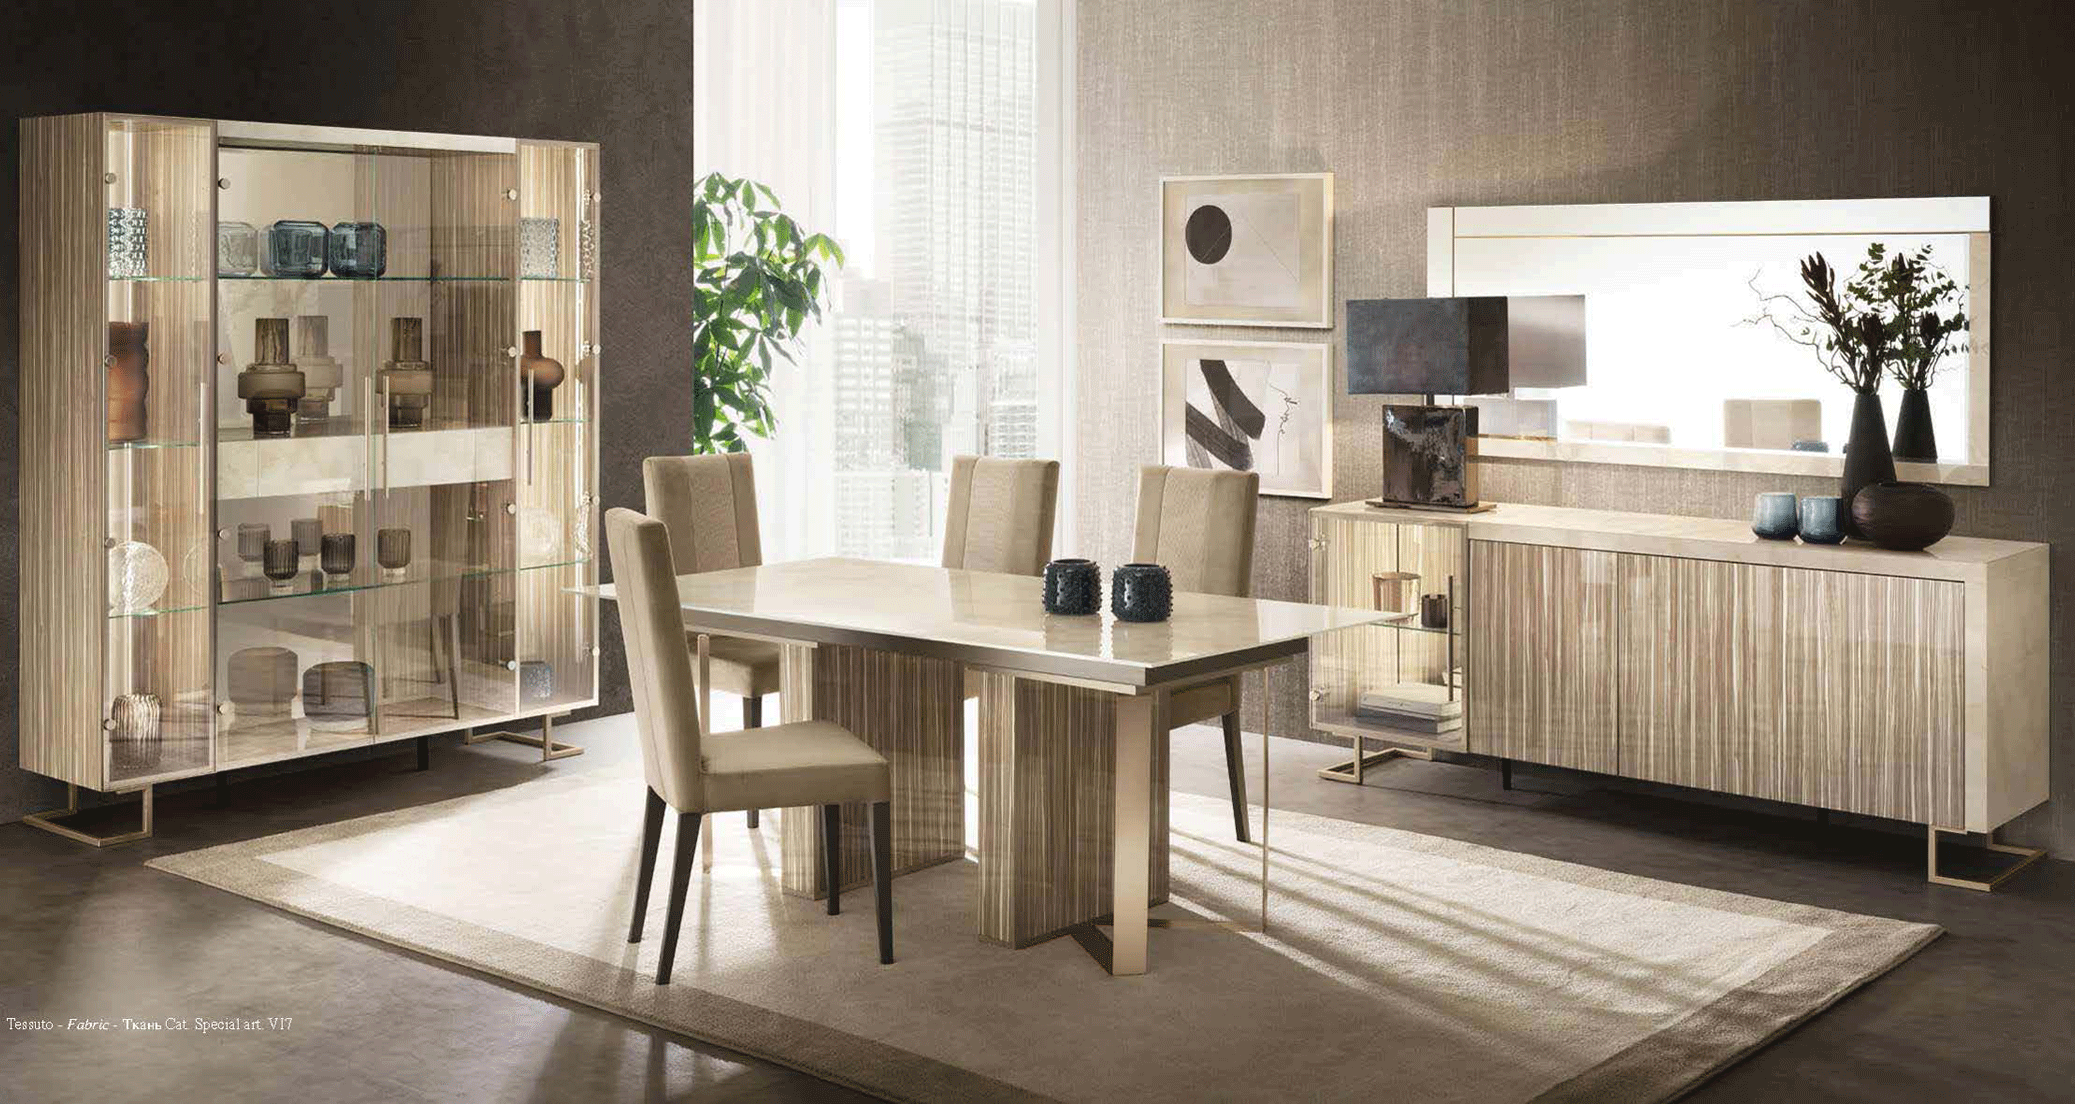 Brands Camel Gold Collection, Italy Luce Light Dining Additional Items